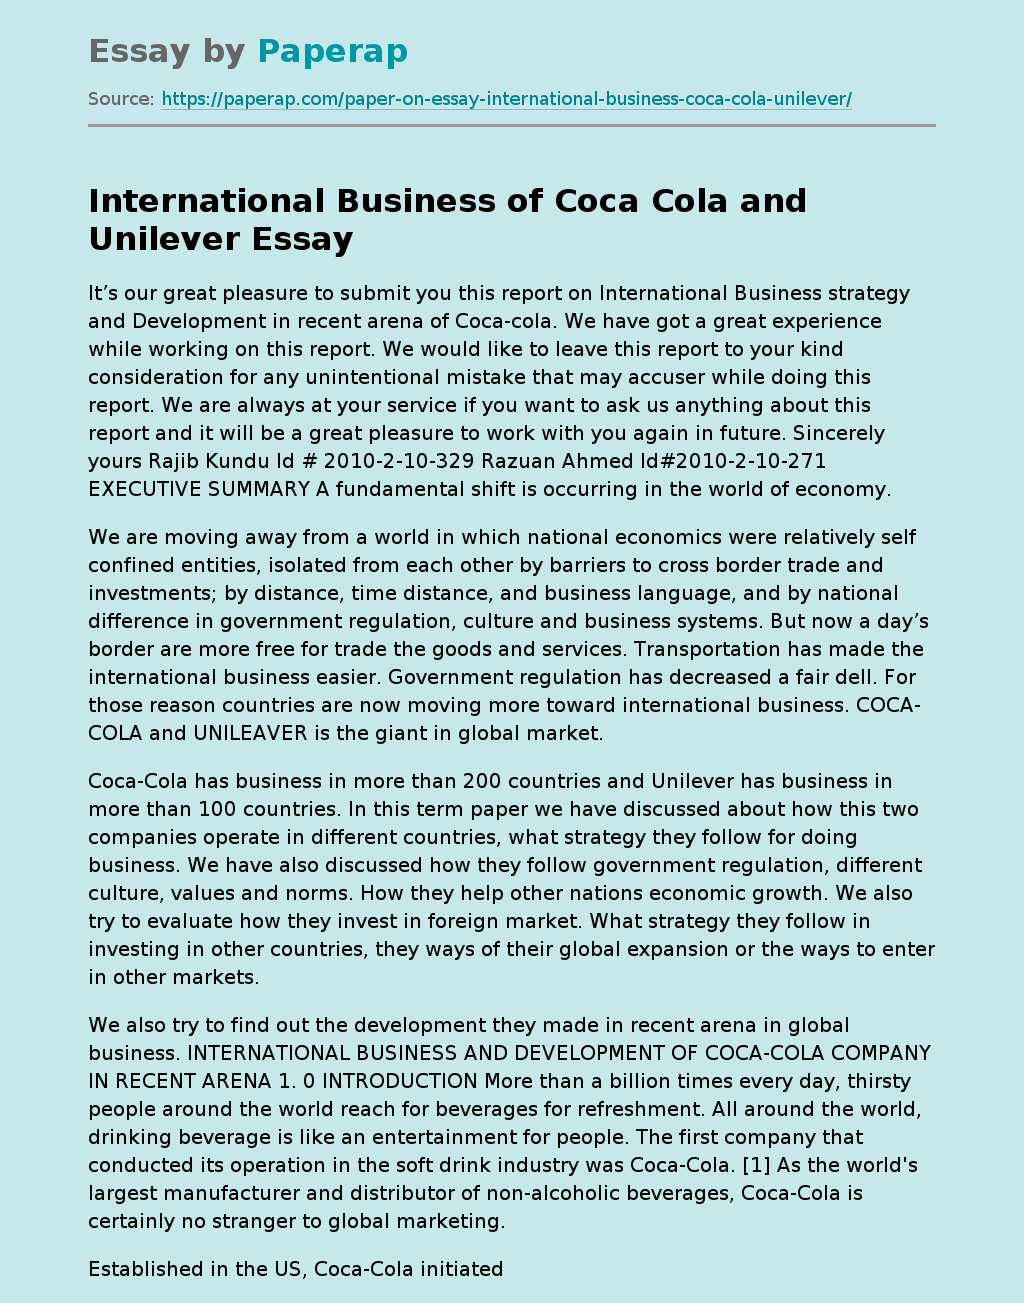 International Business of Coca Cola and Unilever